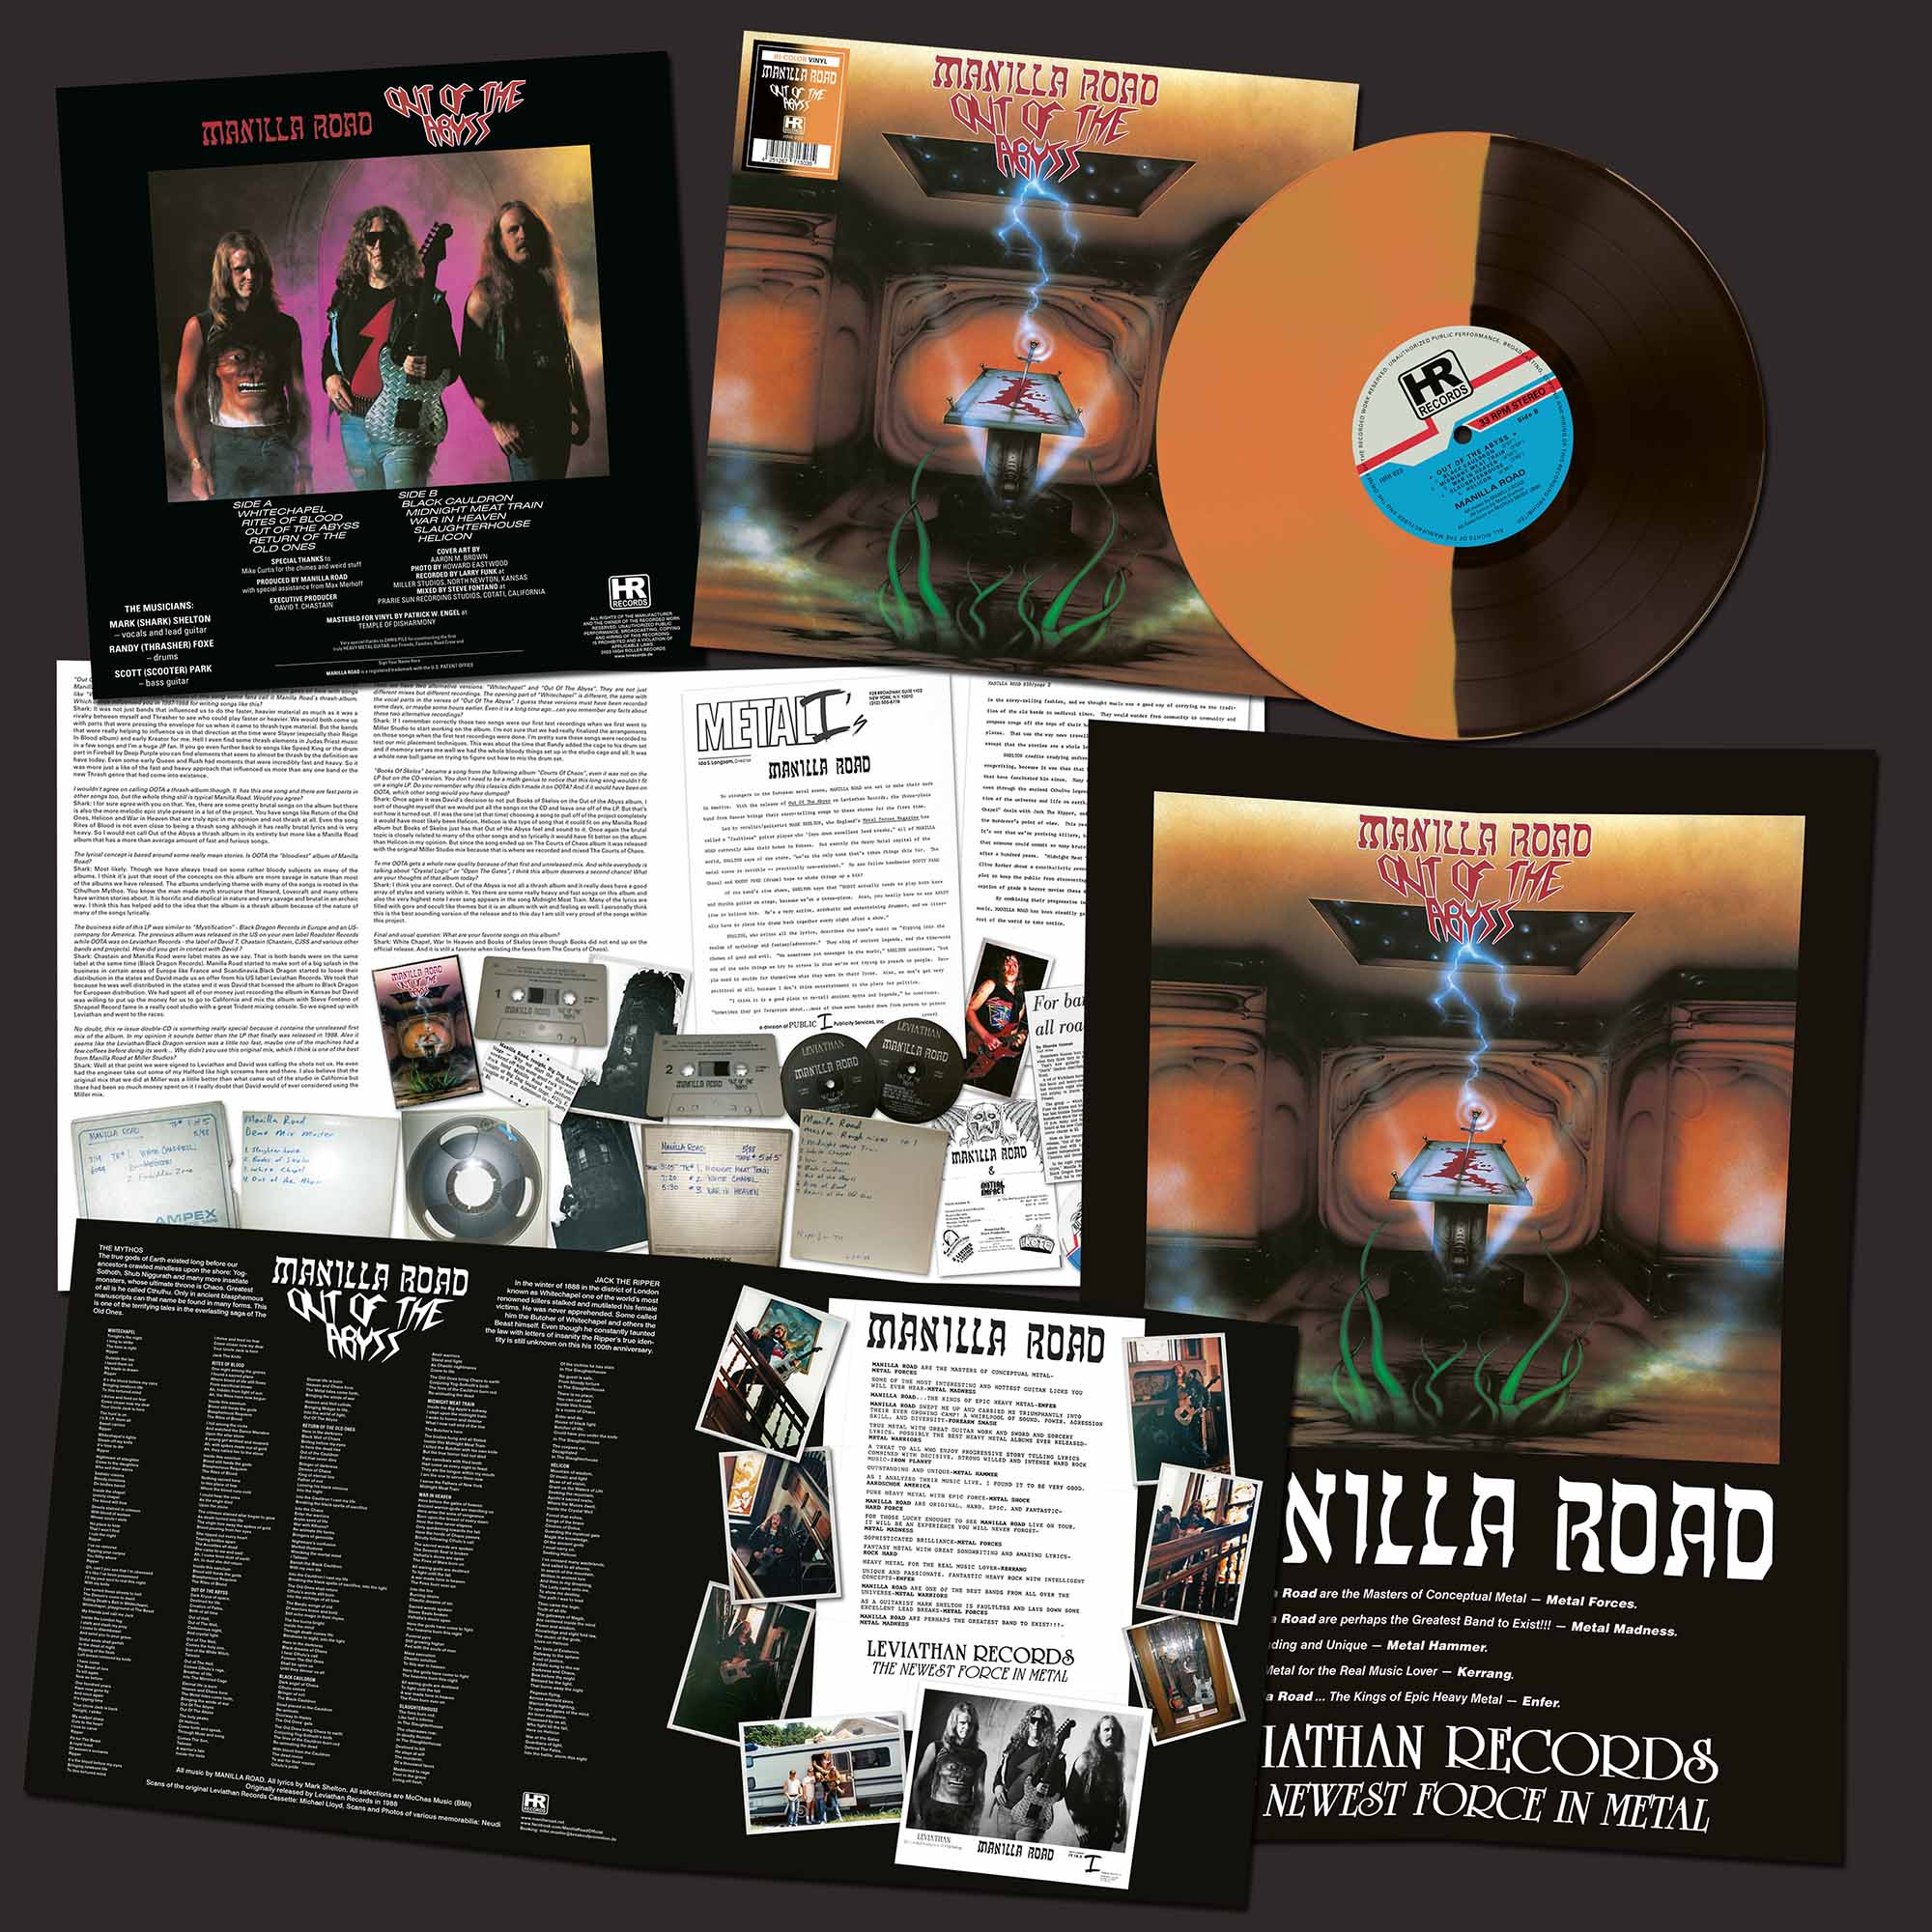 MANILLA ROAD - Out of the Abyss  LP